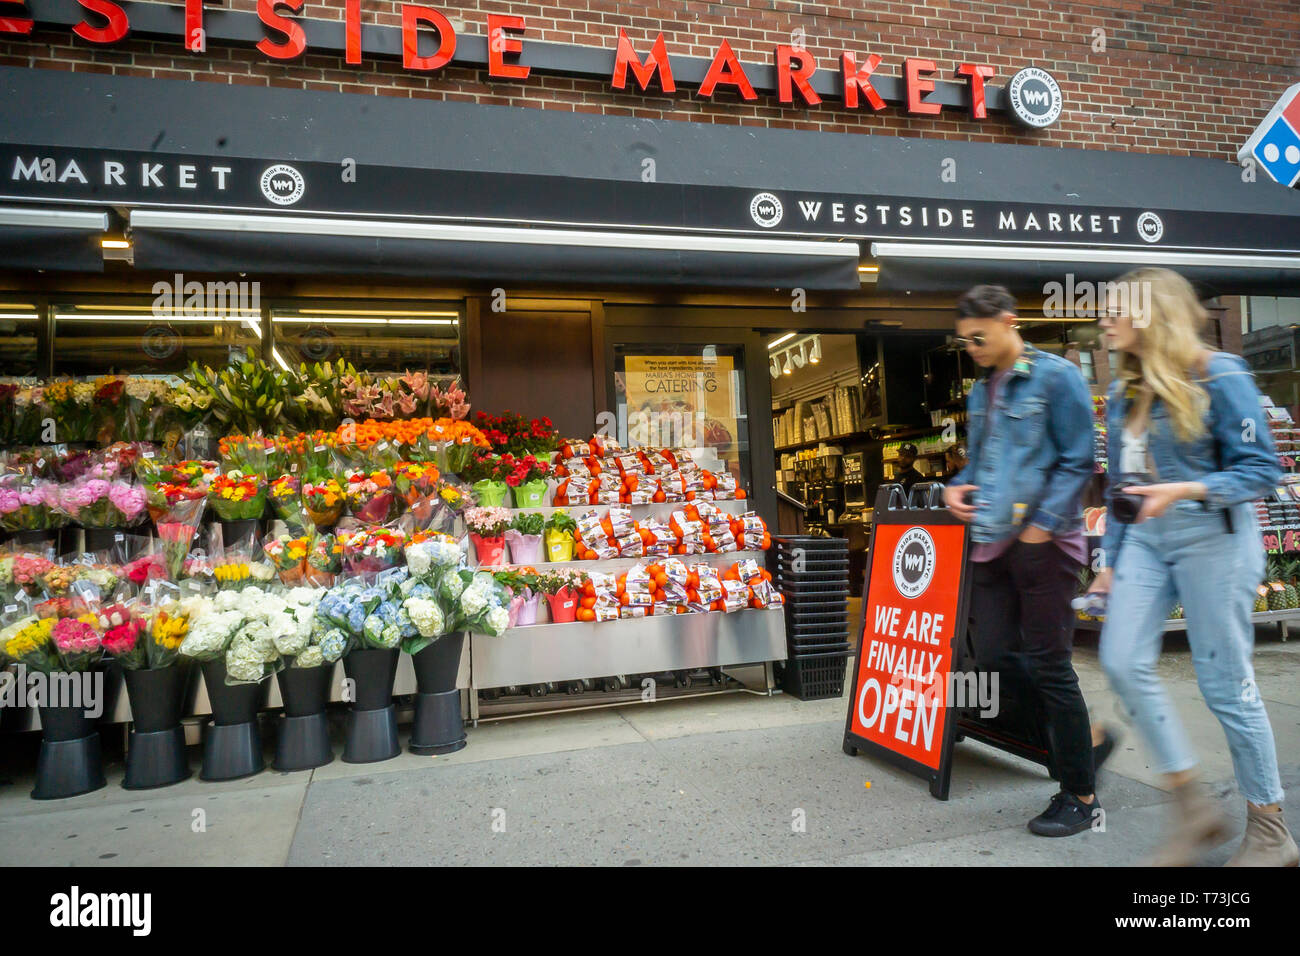 Another branch of the Westside Market chain of supermarkets opens in Chelsea in New York on Thursday, May 2, 2019. The local chain, which replaced the shuttered Garden of Eden supermarket in this location, joins a plethora of food shopping sources in the area including Whole Foods Market, Fairway and Gristedeâ€™s, the local chain New Yorkers love to hate. (Â© Richard B. Levine) Stock Photo